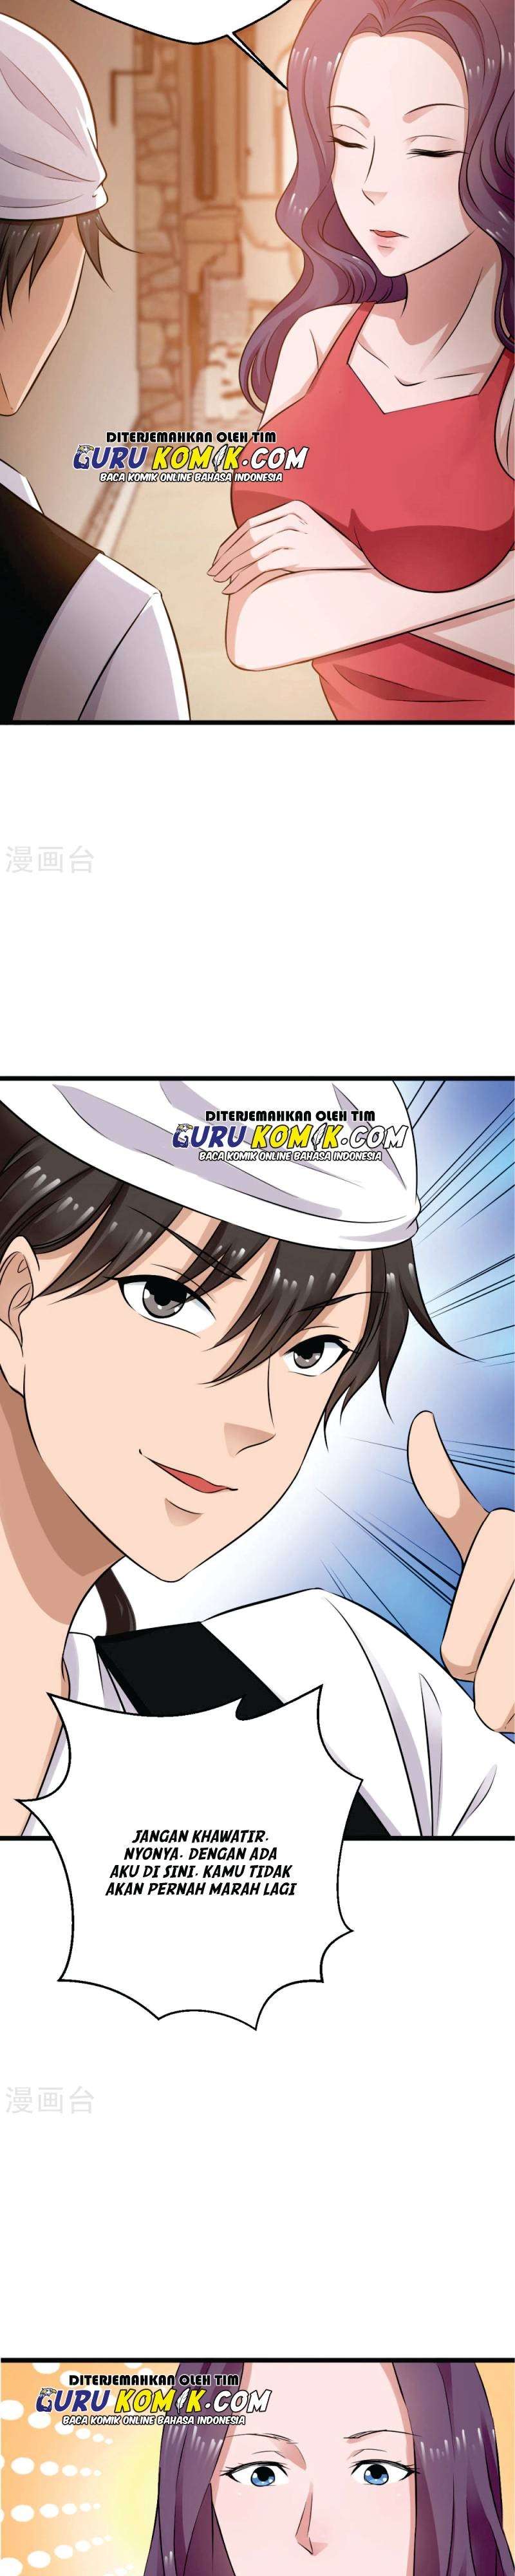 Close Mad Doctor Chapter 35-38